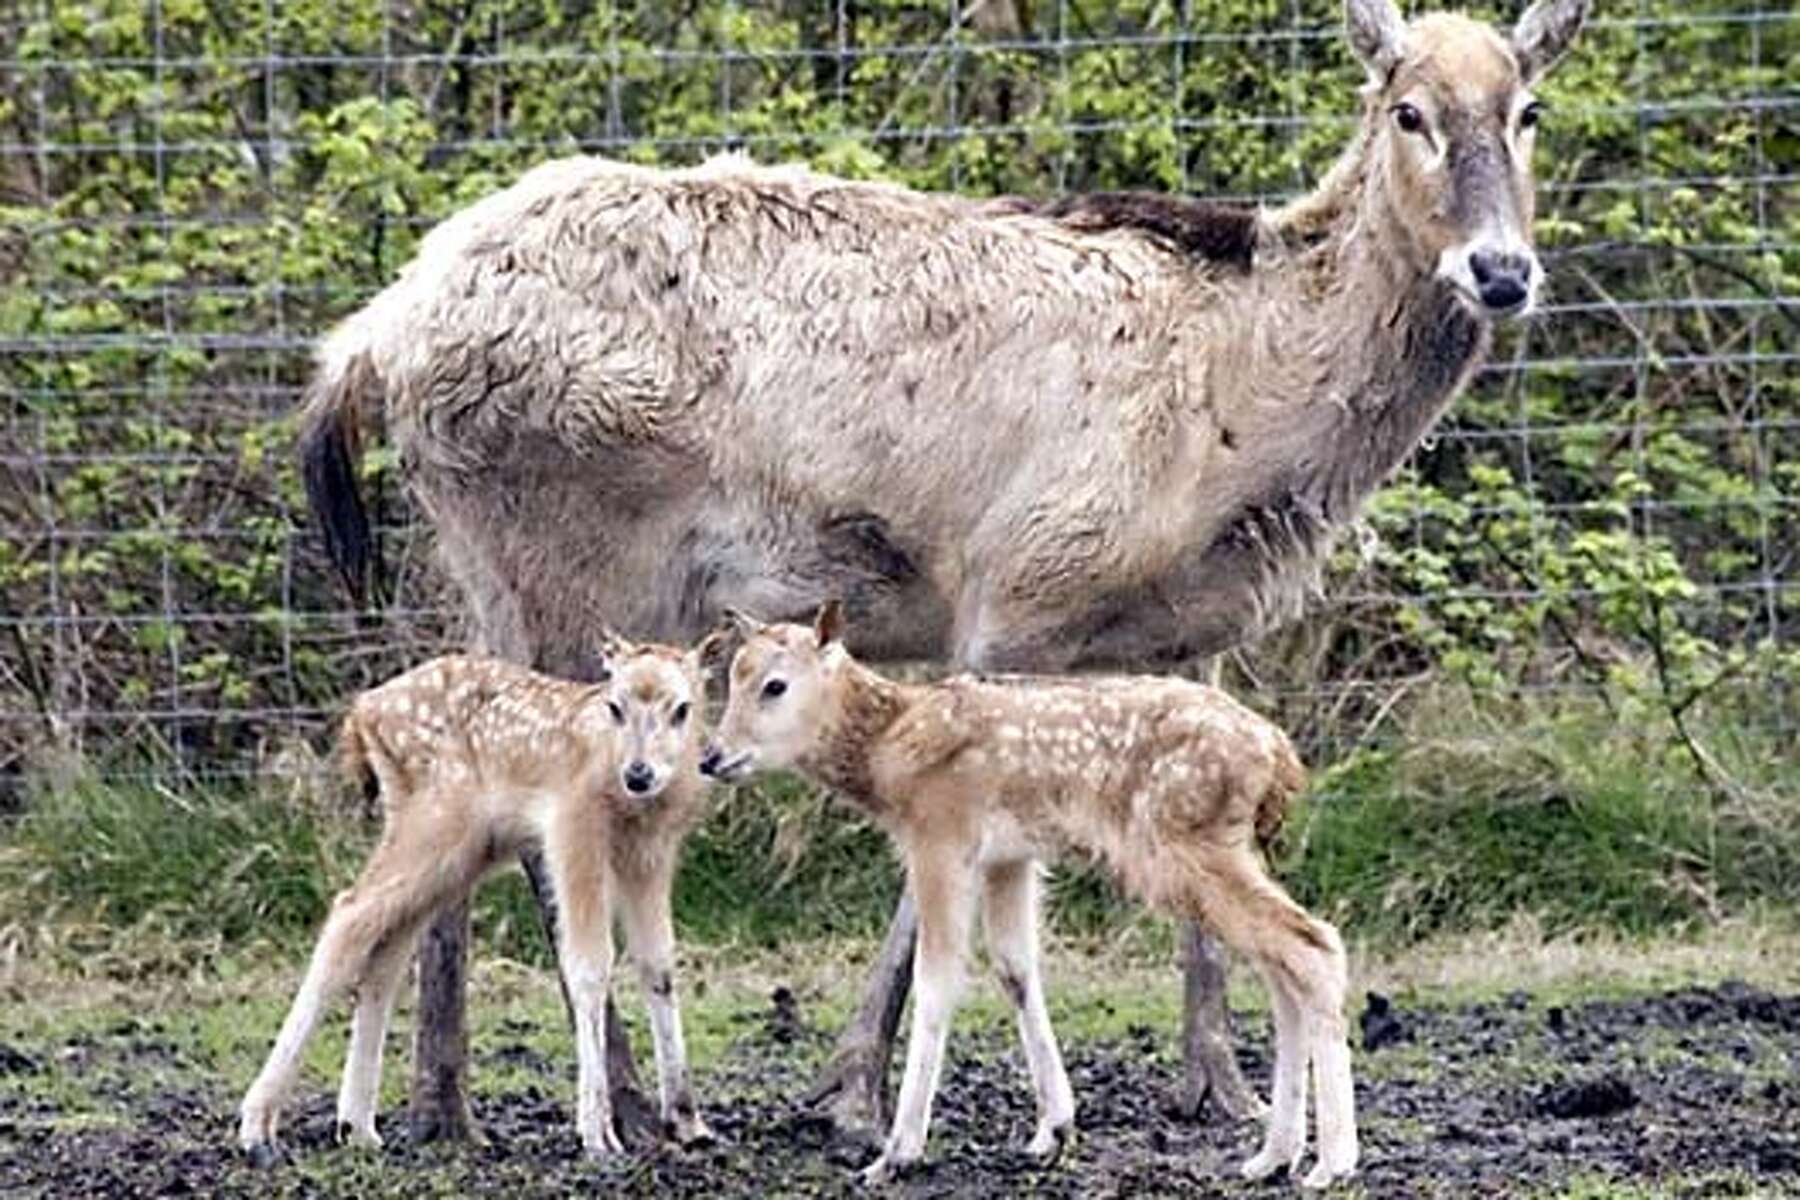 Project to save rare deer wins China conservation award / Government open  to better relations with activists